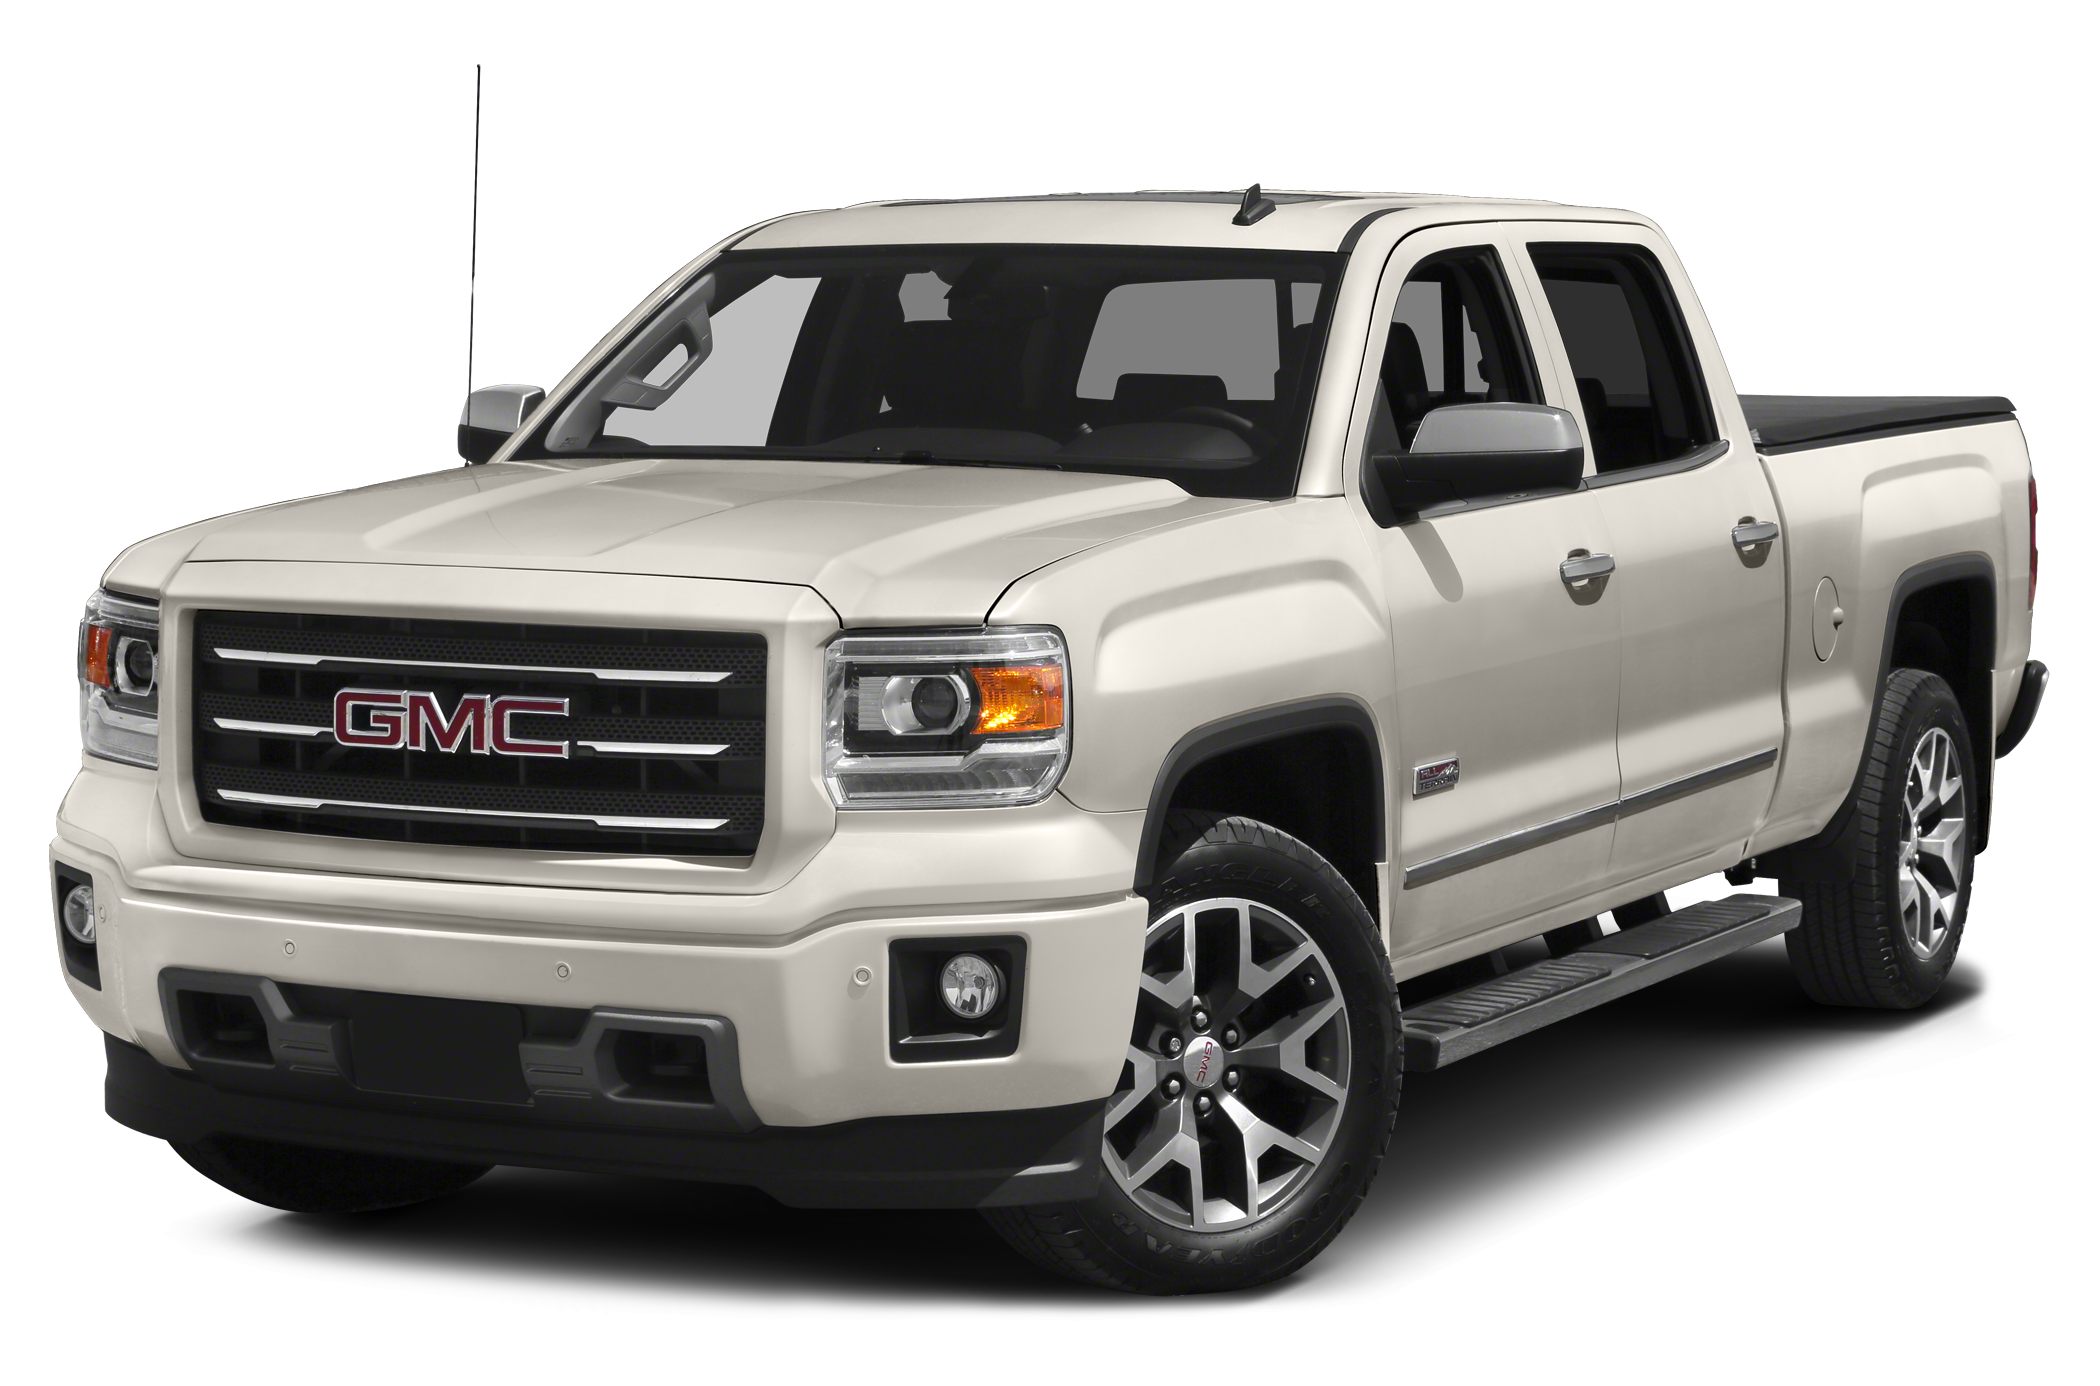 2015 Gmc Sierra 1500 Sle 4x2 Crew Cab 5 75 Ft Box 143 5 In Wb Pictures